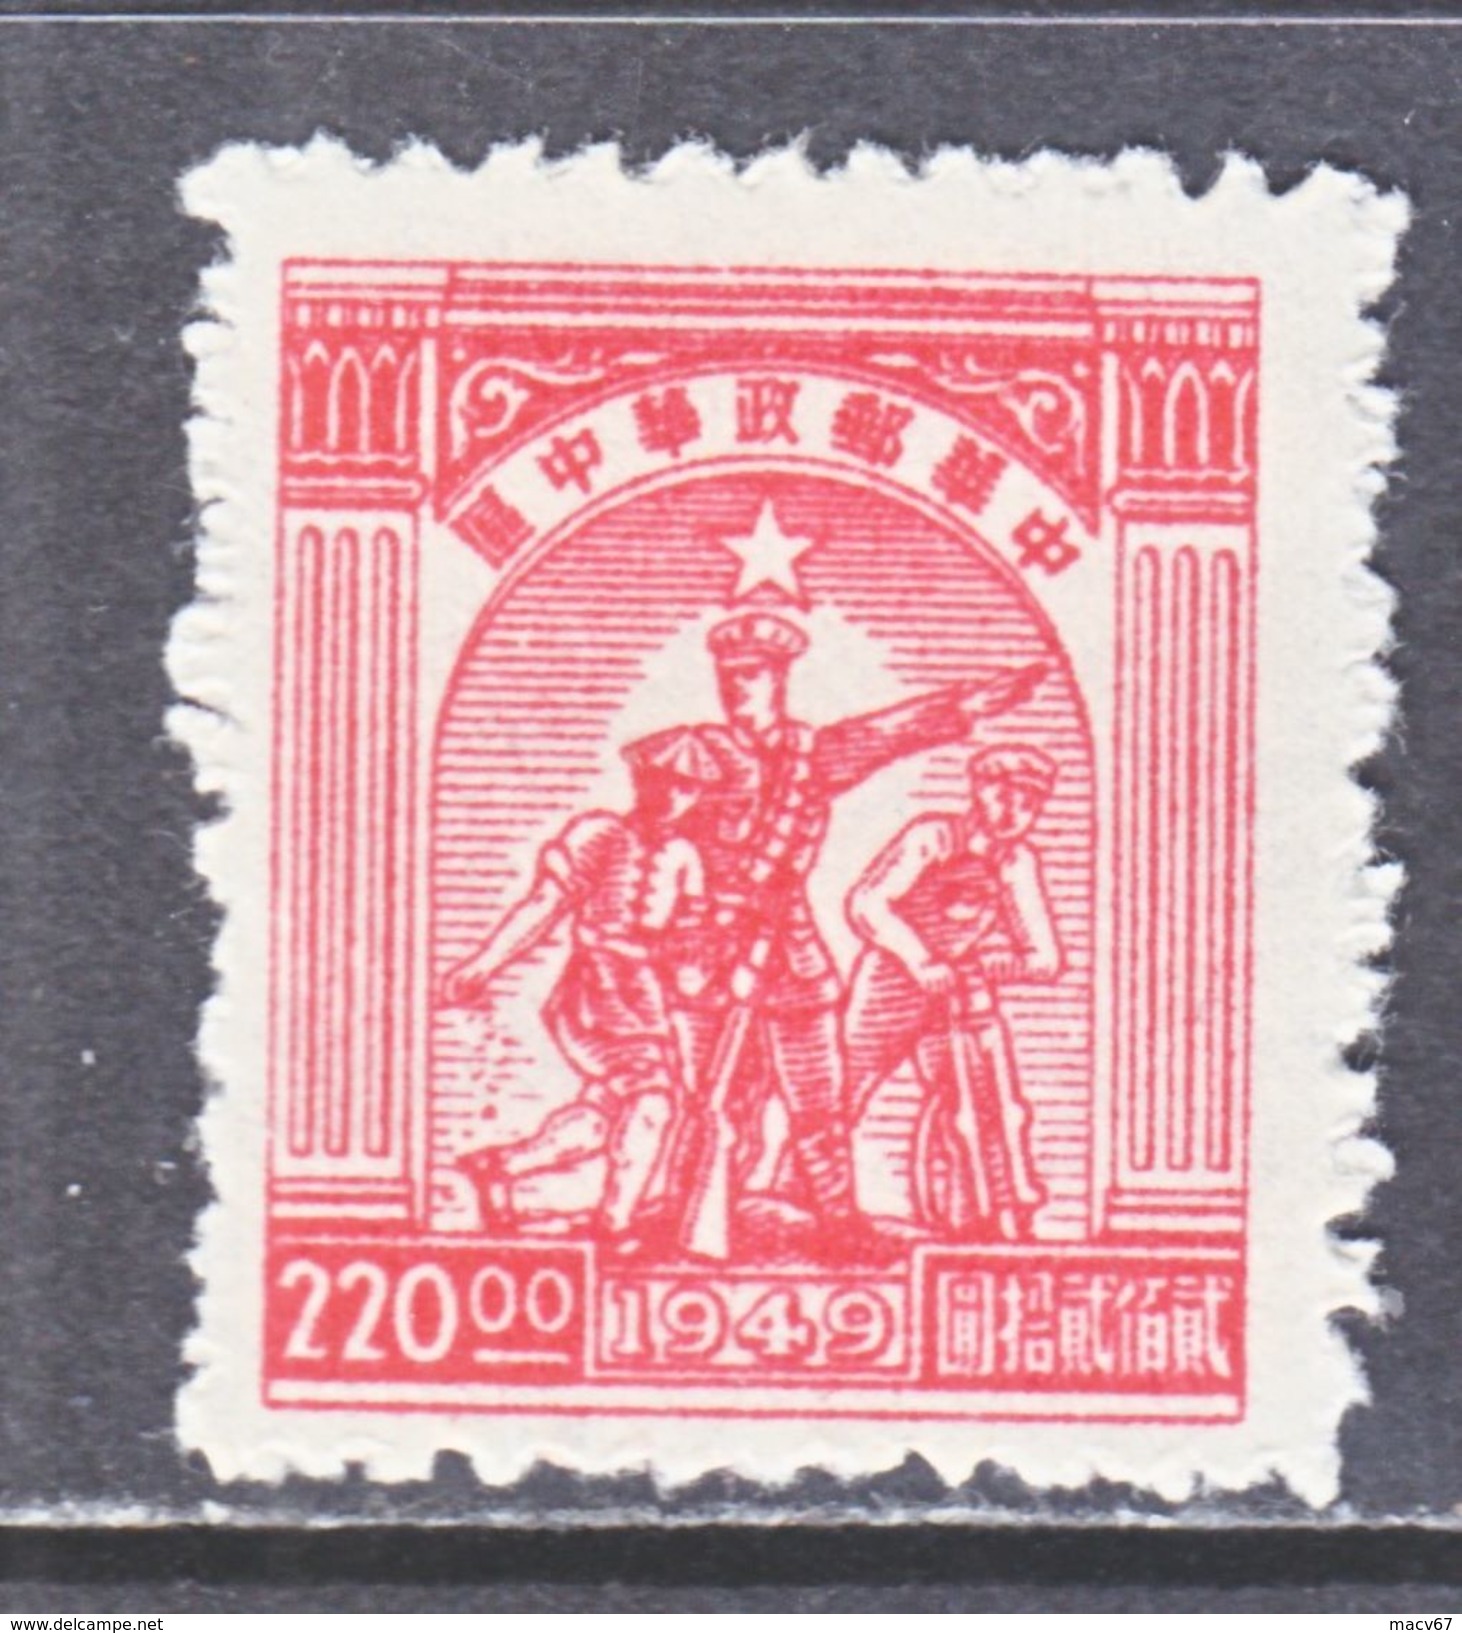 PRC  CENTRAL  CHINA  6 L 46  * - China Central 1948-49